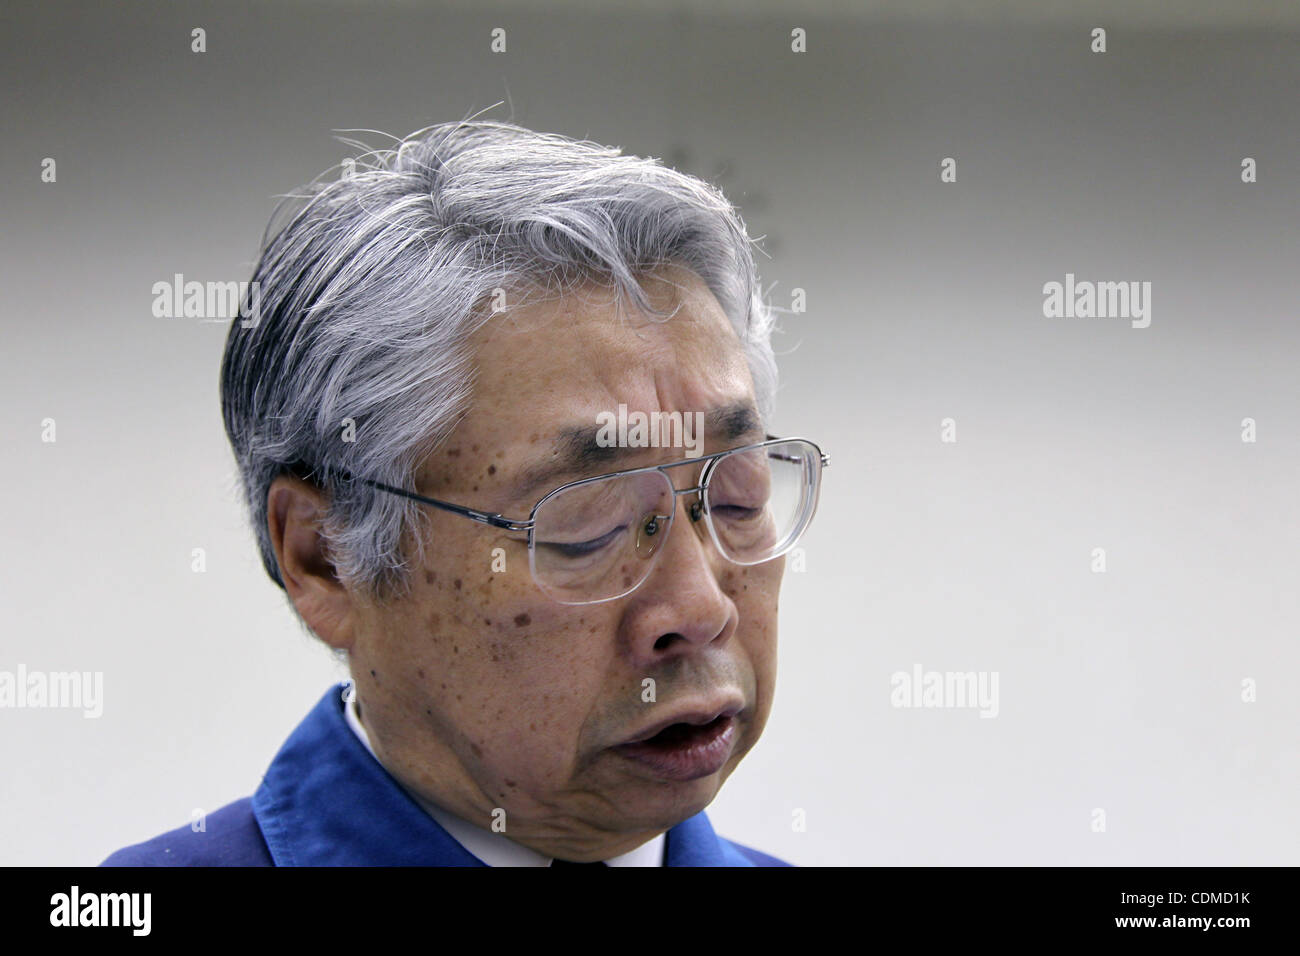 Apr. 5, 2011 - Tokyo, Japan - Tokyo Electric Power Company (TEPCO) Executive Vice-President TAKASHI FUJIMOTO attends a press conference at the company's headquarters in Tokyo. Under the confusion and troubles at TEPCO's Fukushima Daiichi nuclear plant, the share price of TEPCO has hit the variable p Stock Photo